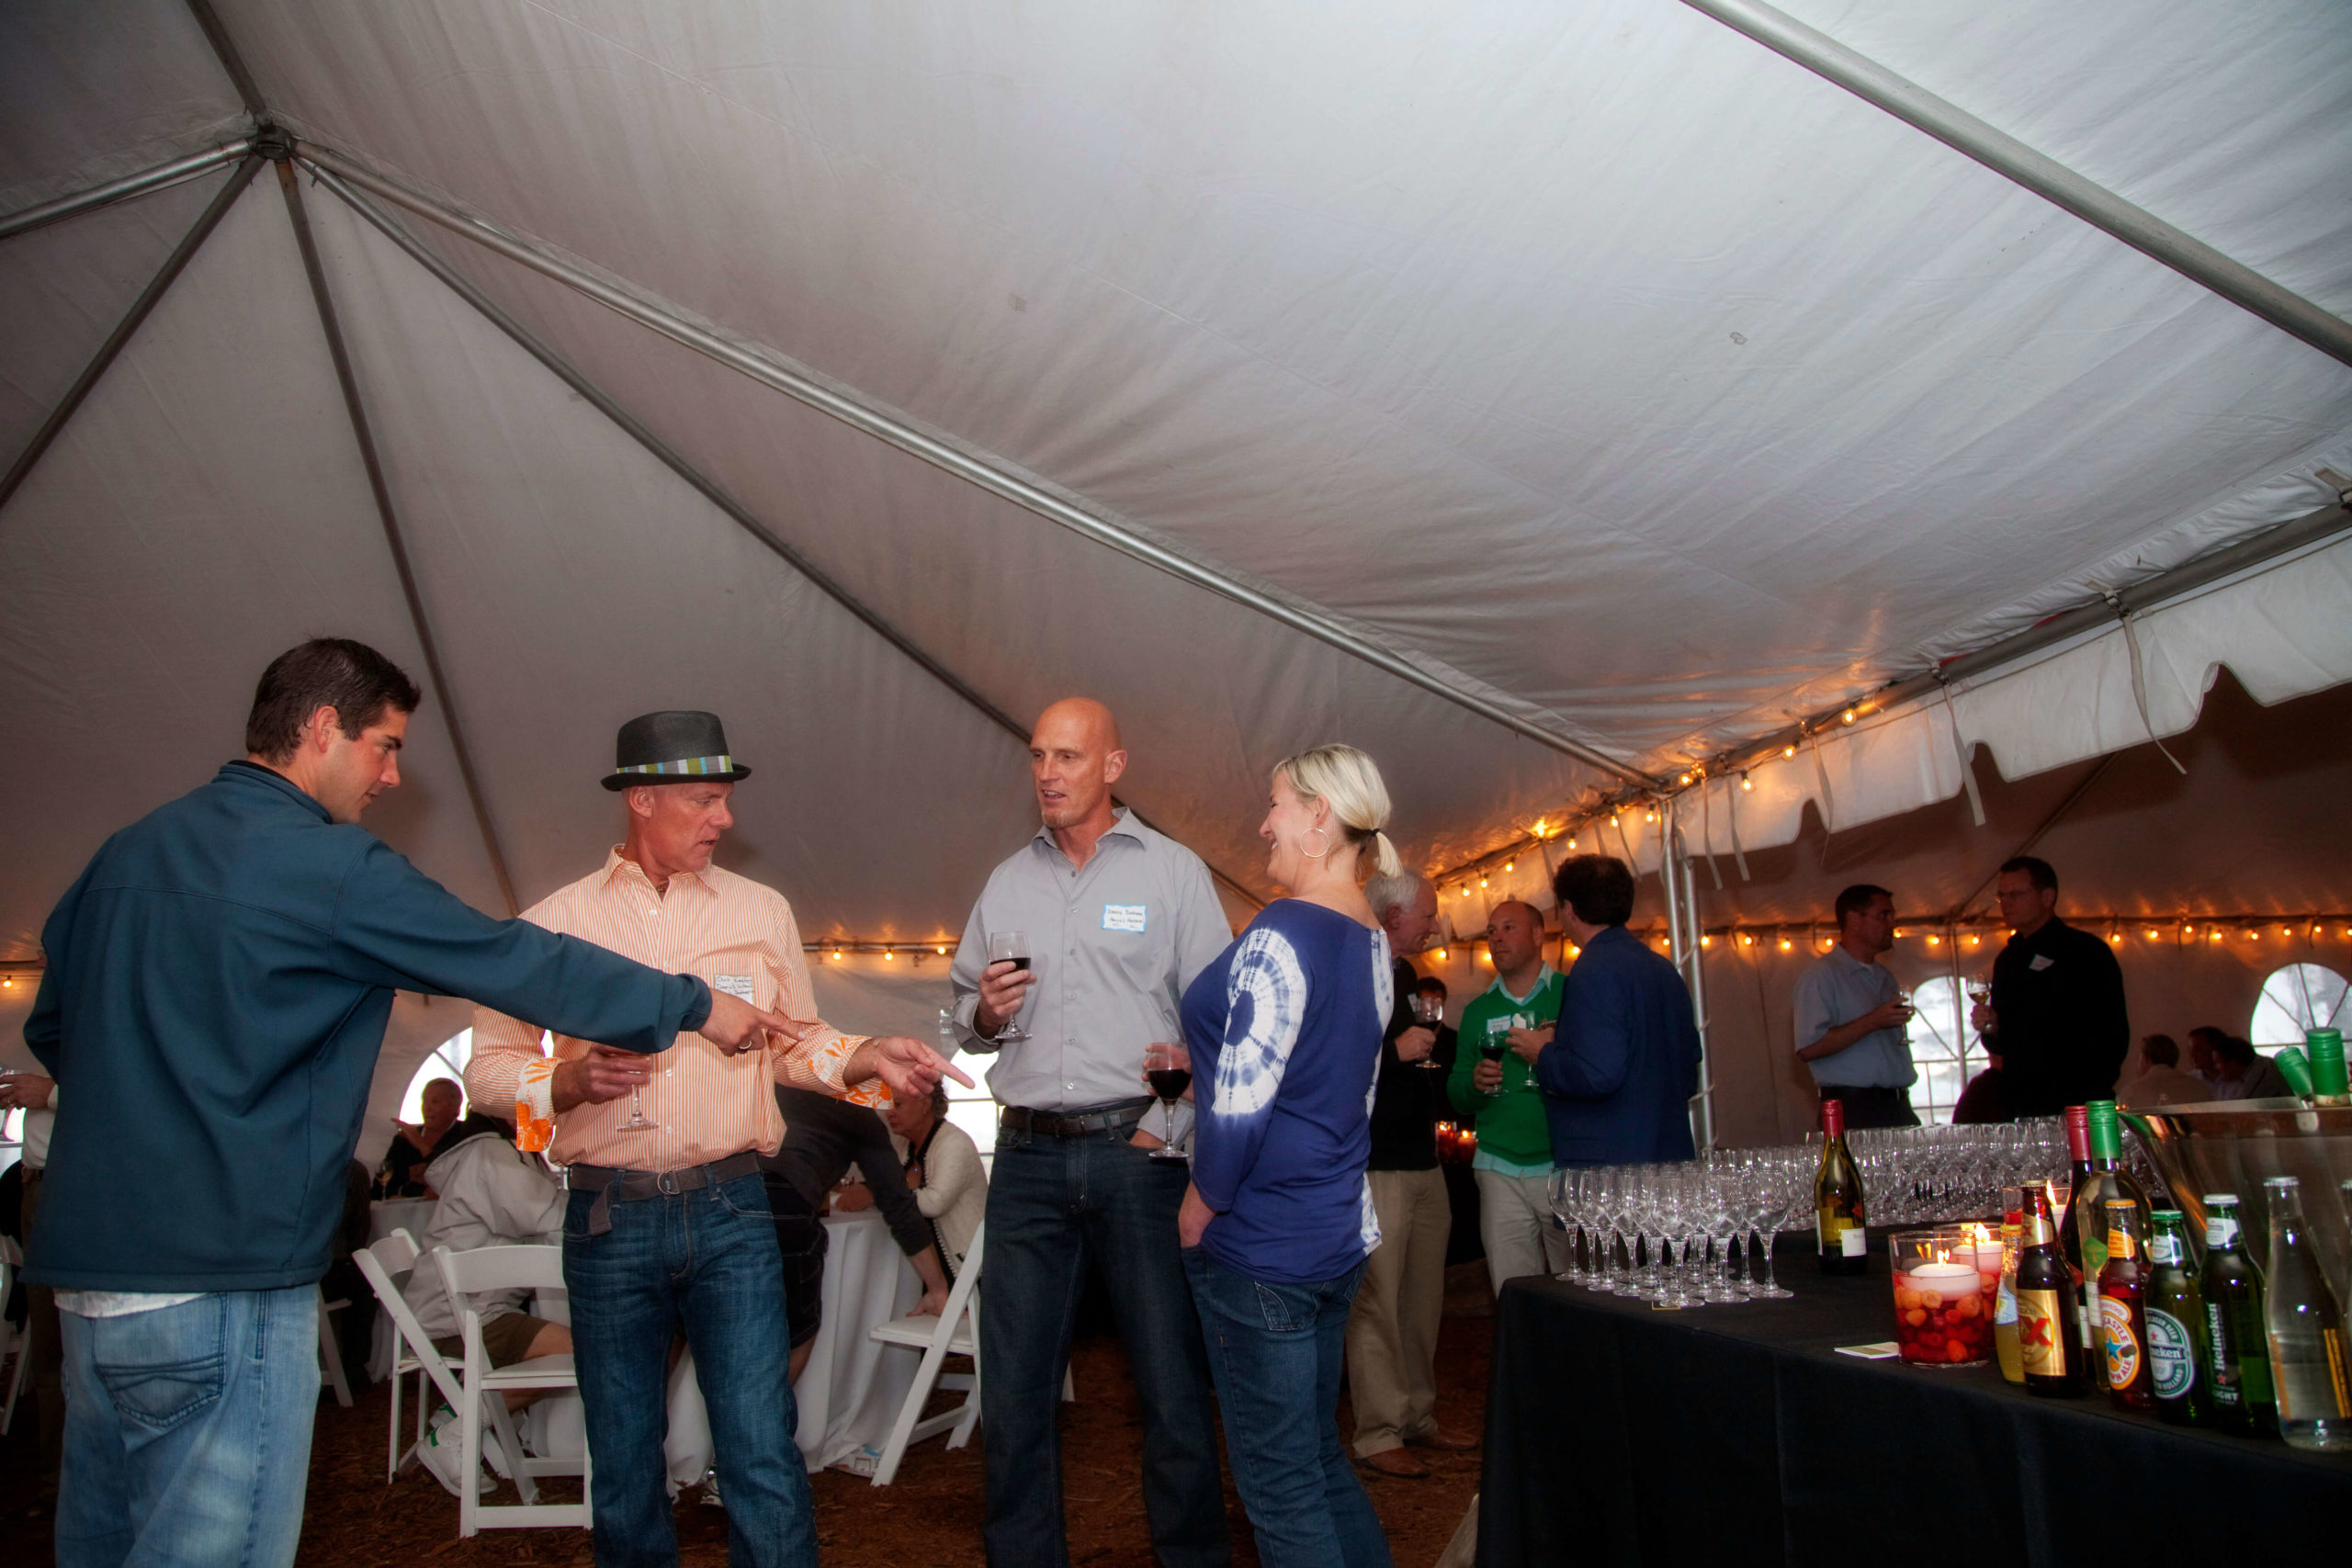 Group enjoying Seabrook's Tented Event Space